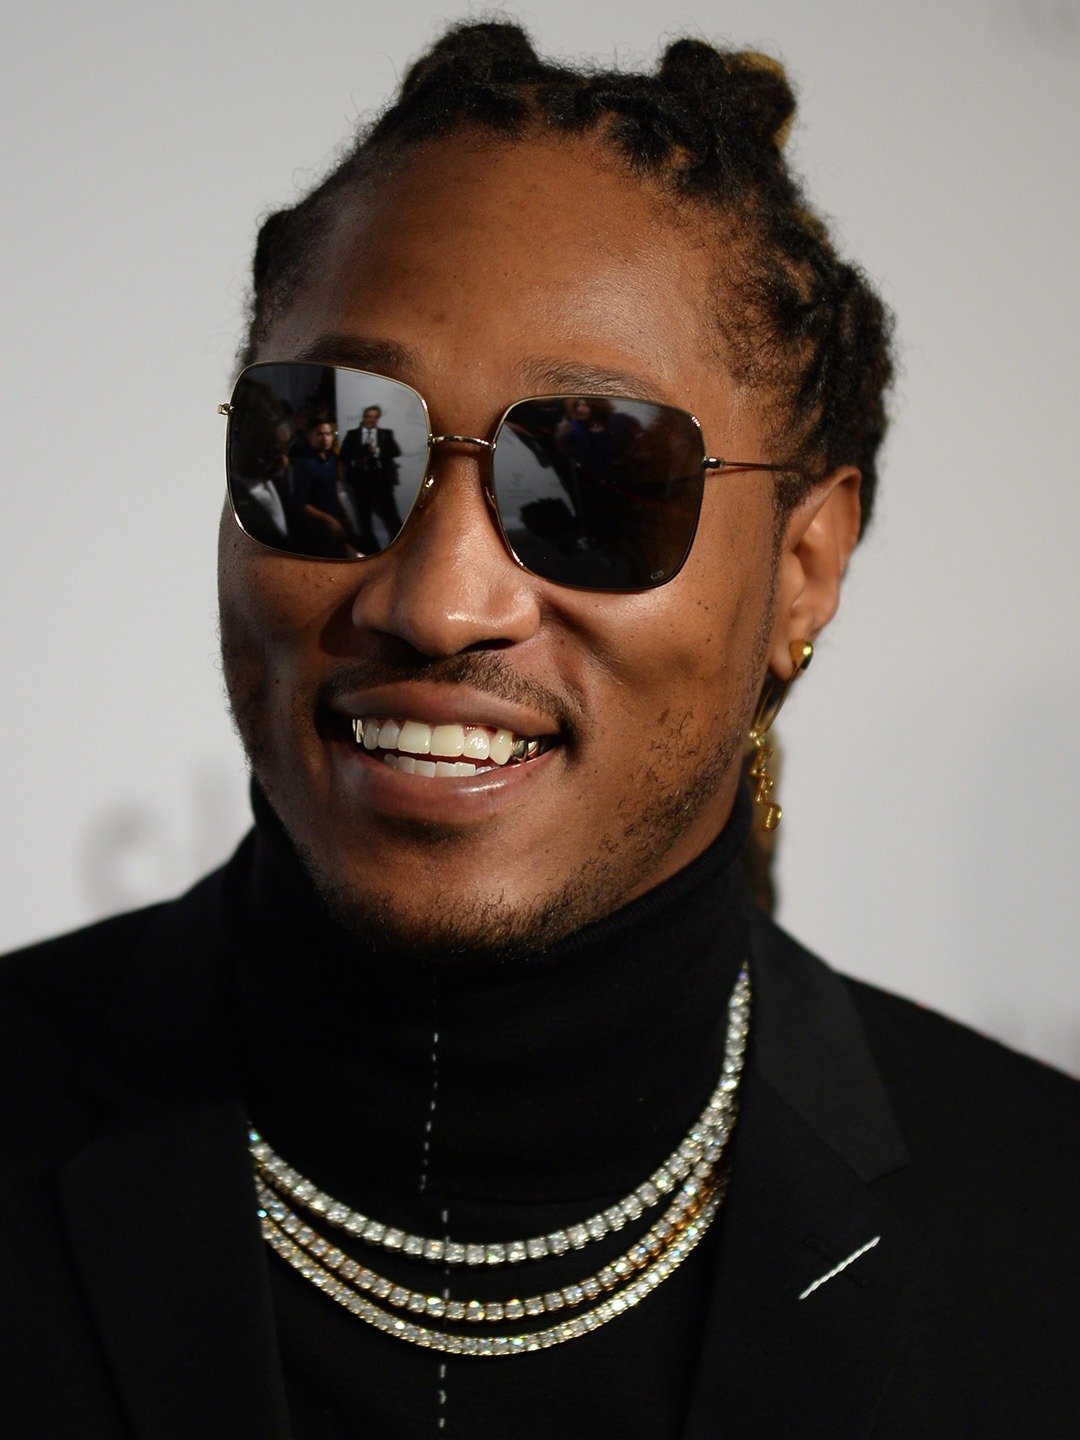 How tall is Future?